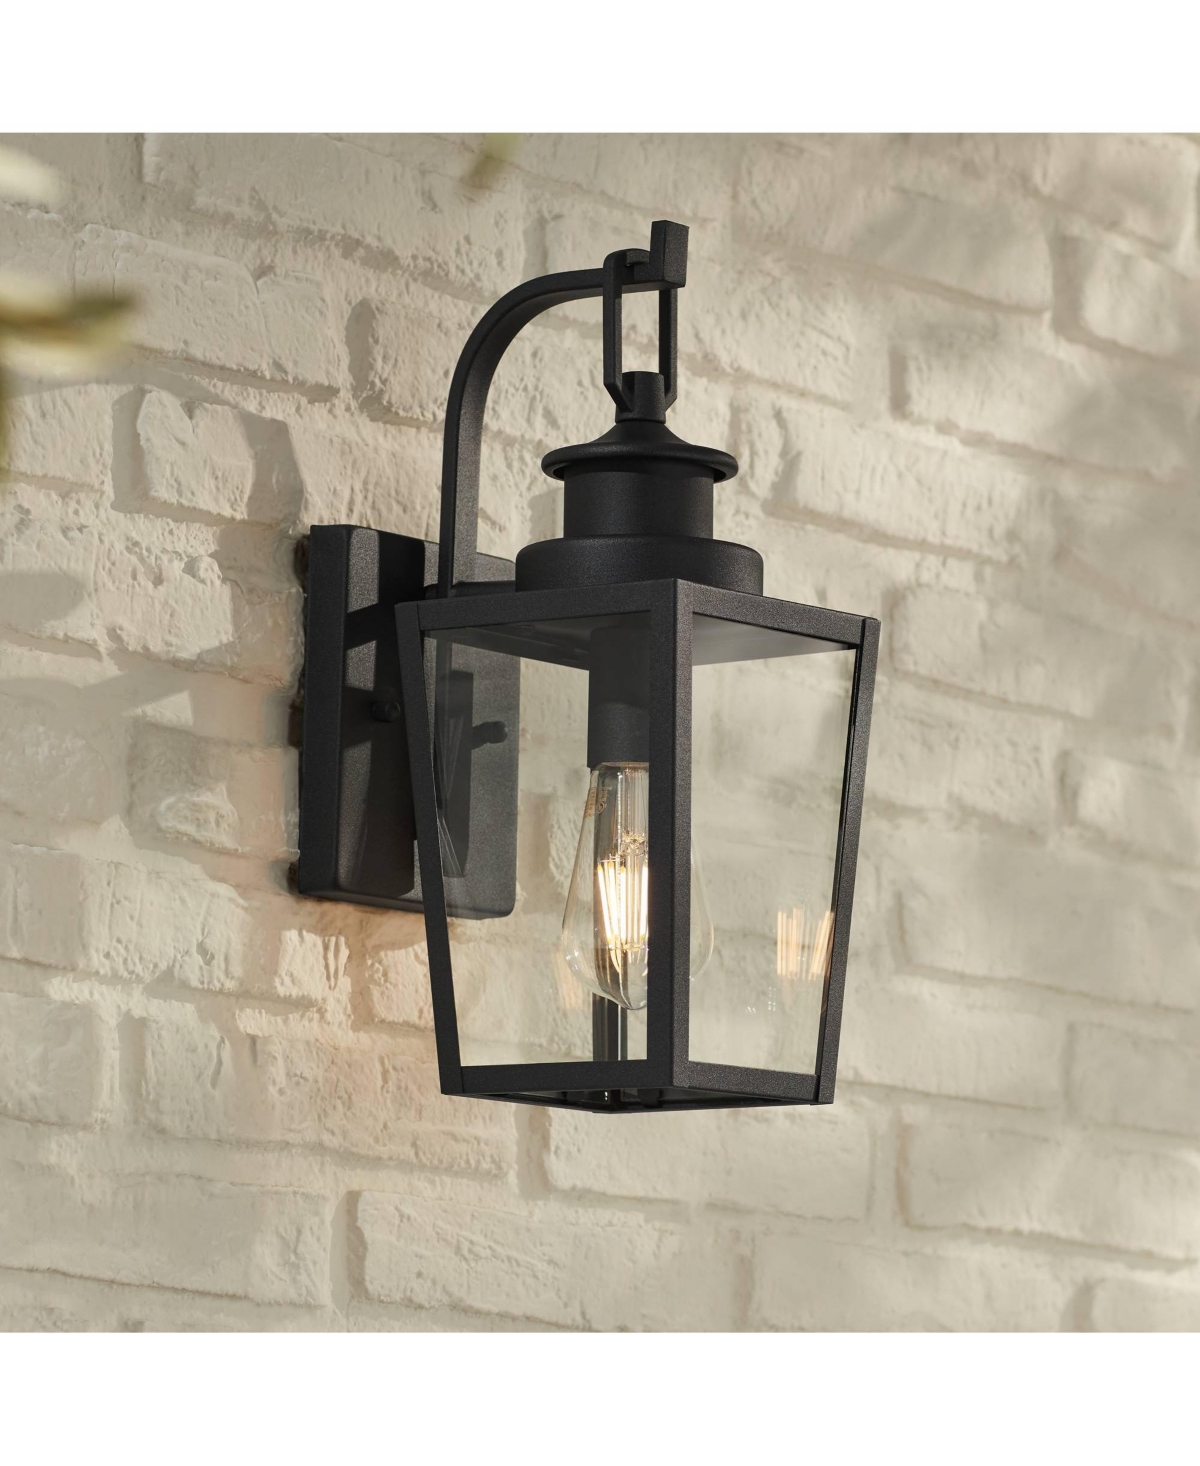 Ackerly 14" High Farmhouse Rustic Lantern Outdoor Wall Light Fixture Mount Porch House Exterior Outside Edison Bulb Weatherproof Textured Black Finish